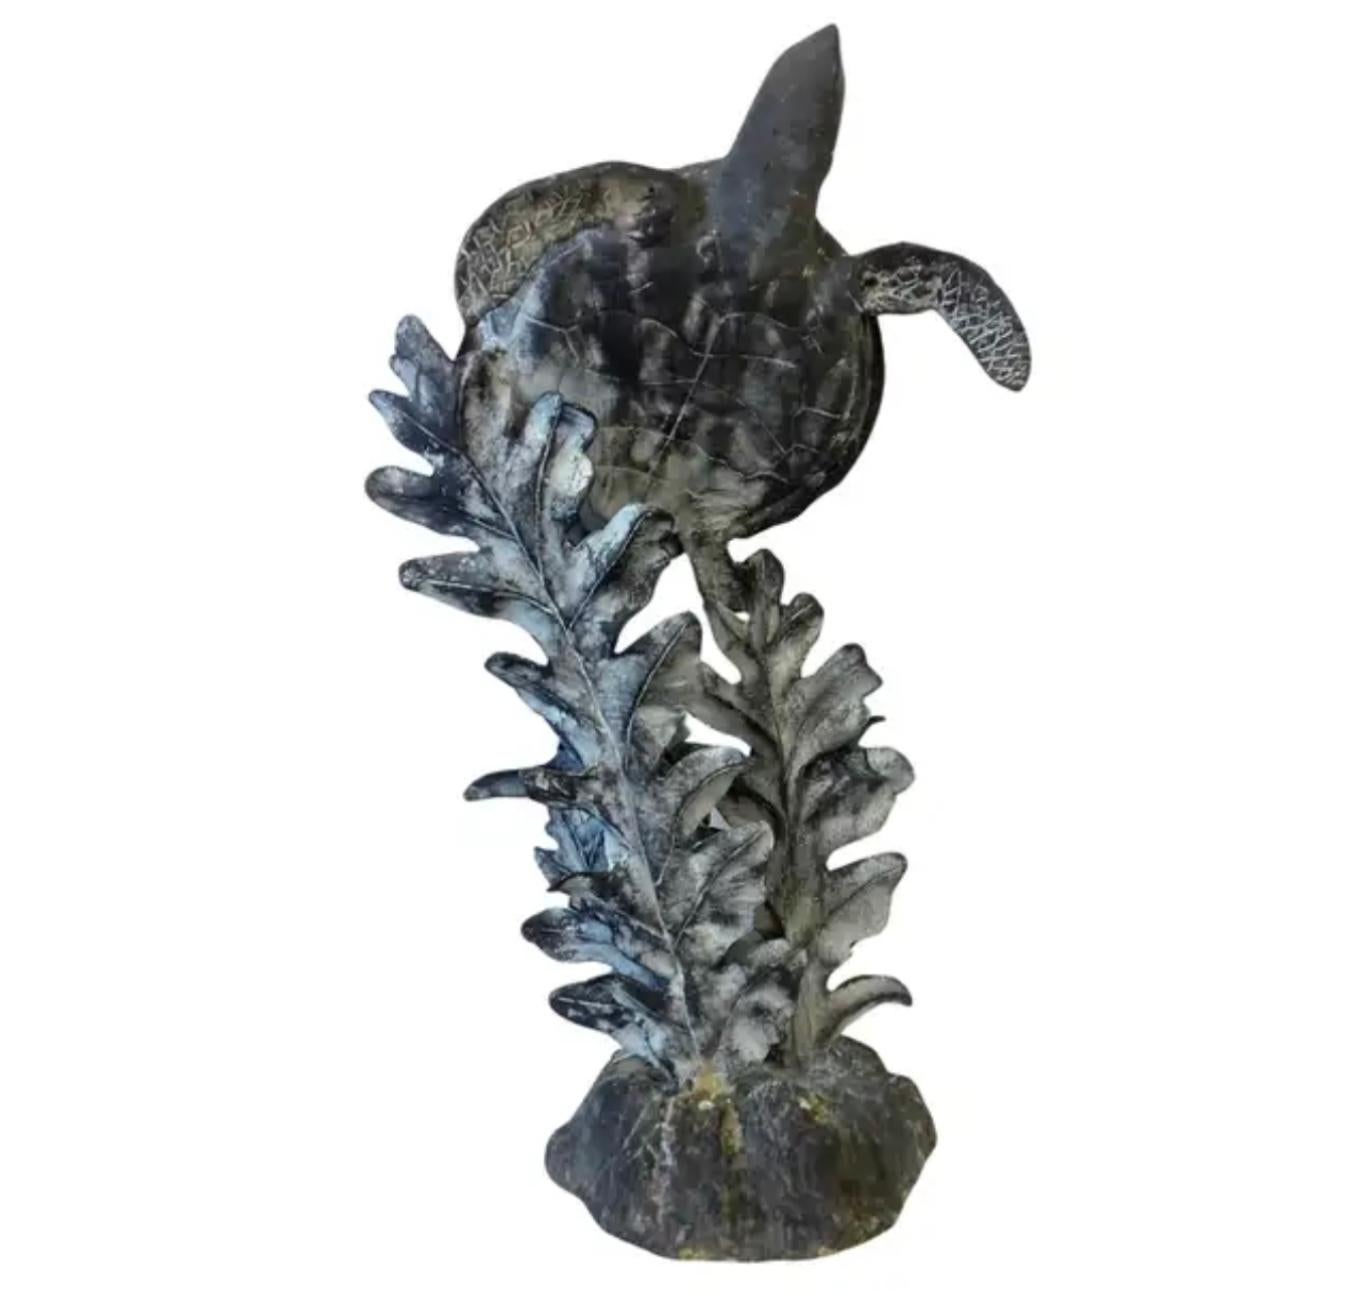 Charming 20th century aluminum sea turtle sculpture depicting a larger and a small sea turtle, several fish, and sea foliage on a large sea reef base. A perfect addition to any nautical or coastal themed decor. 